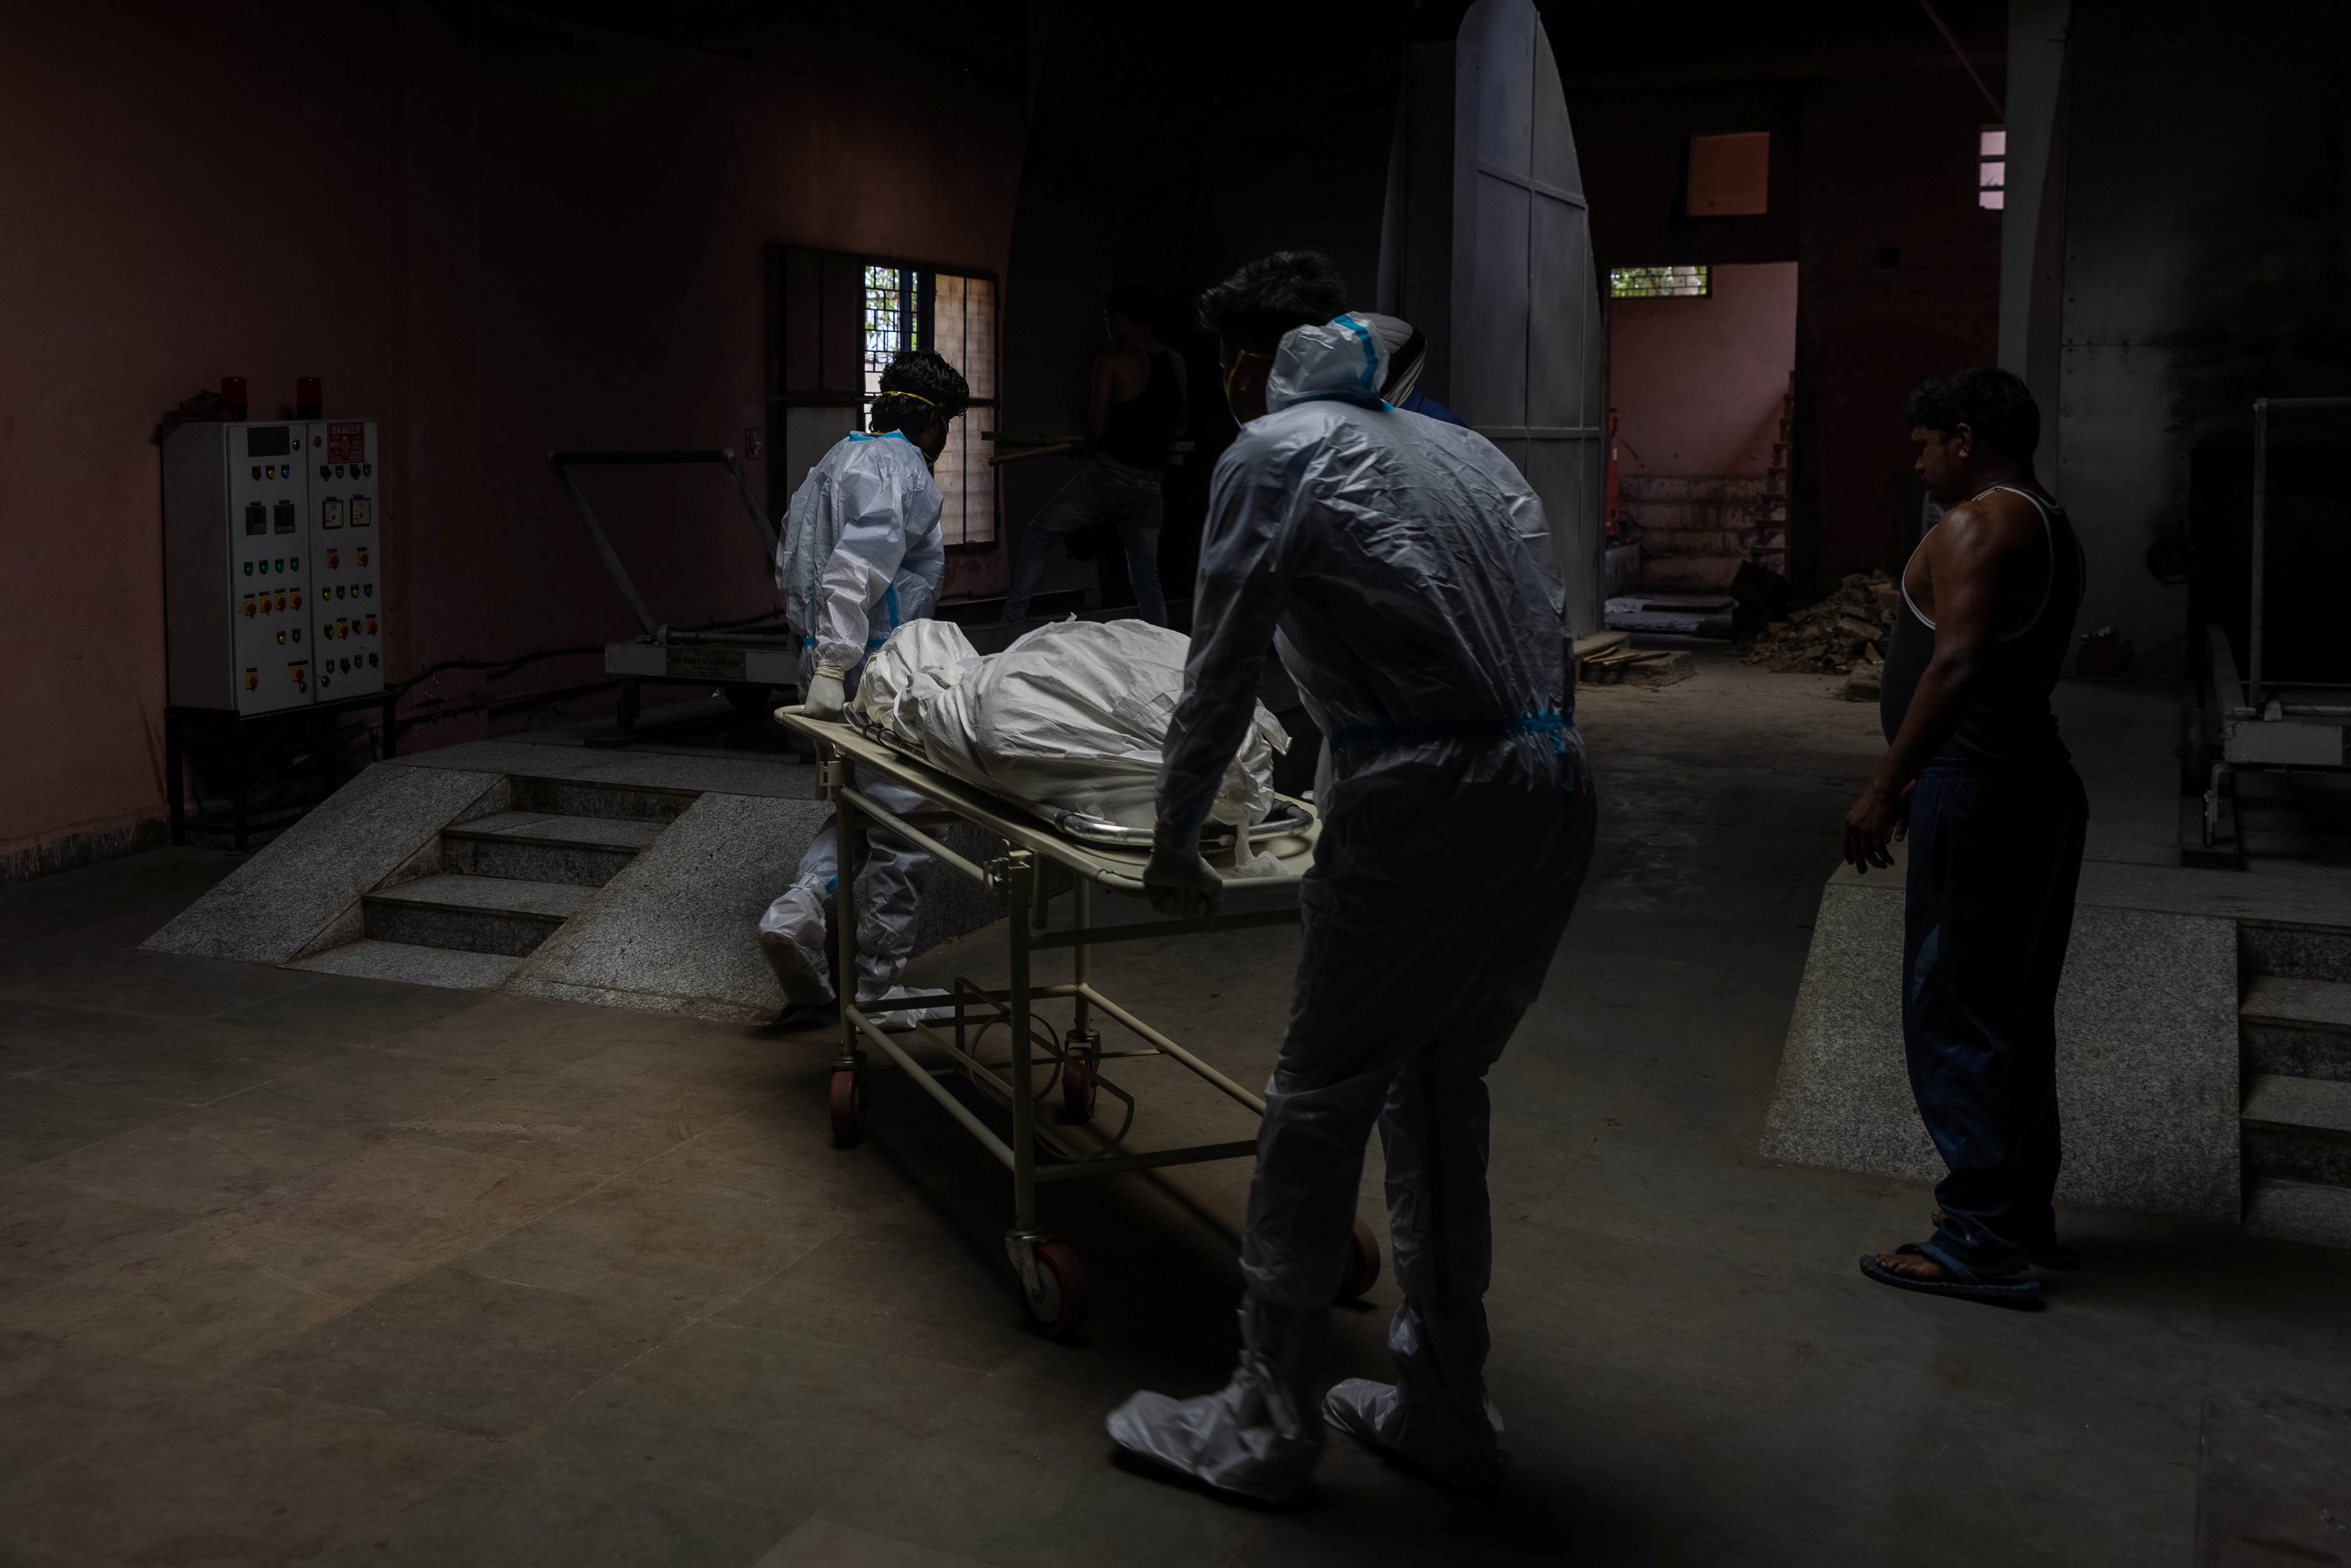 Health workers carry the body of a person, who died from complications related to the coronavirus disease (COVID-19), for cremation at a crematorium in New Delhi